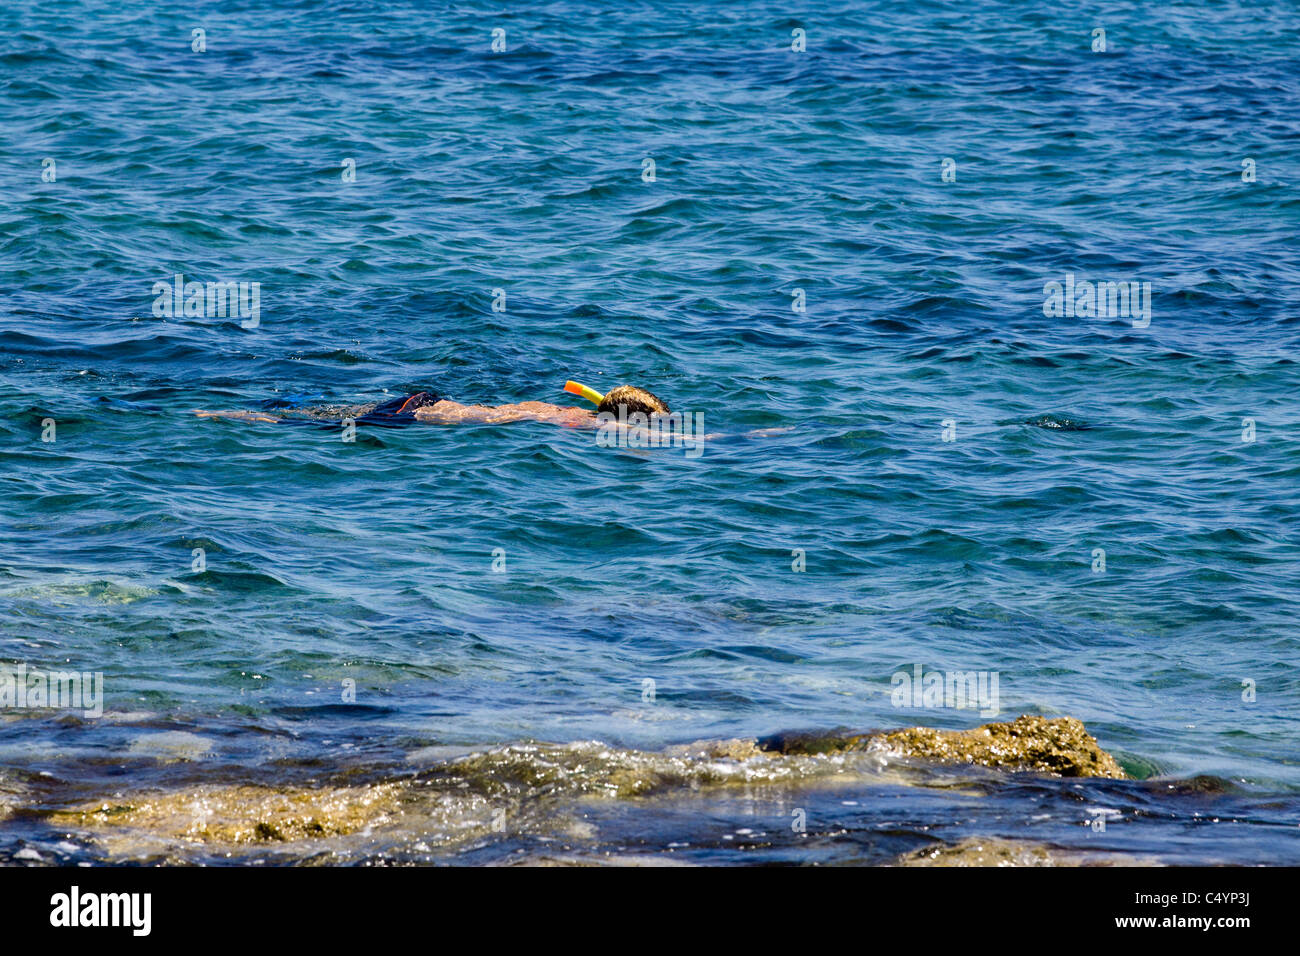 A Man Snorkeling on the Mediterranean sea in Pafos Cyprus Stock Photo